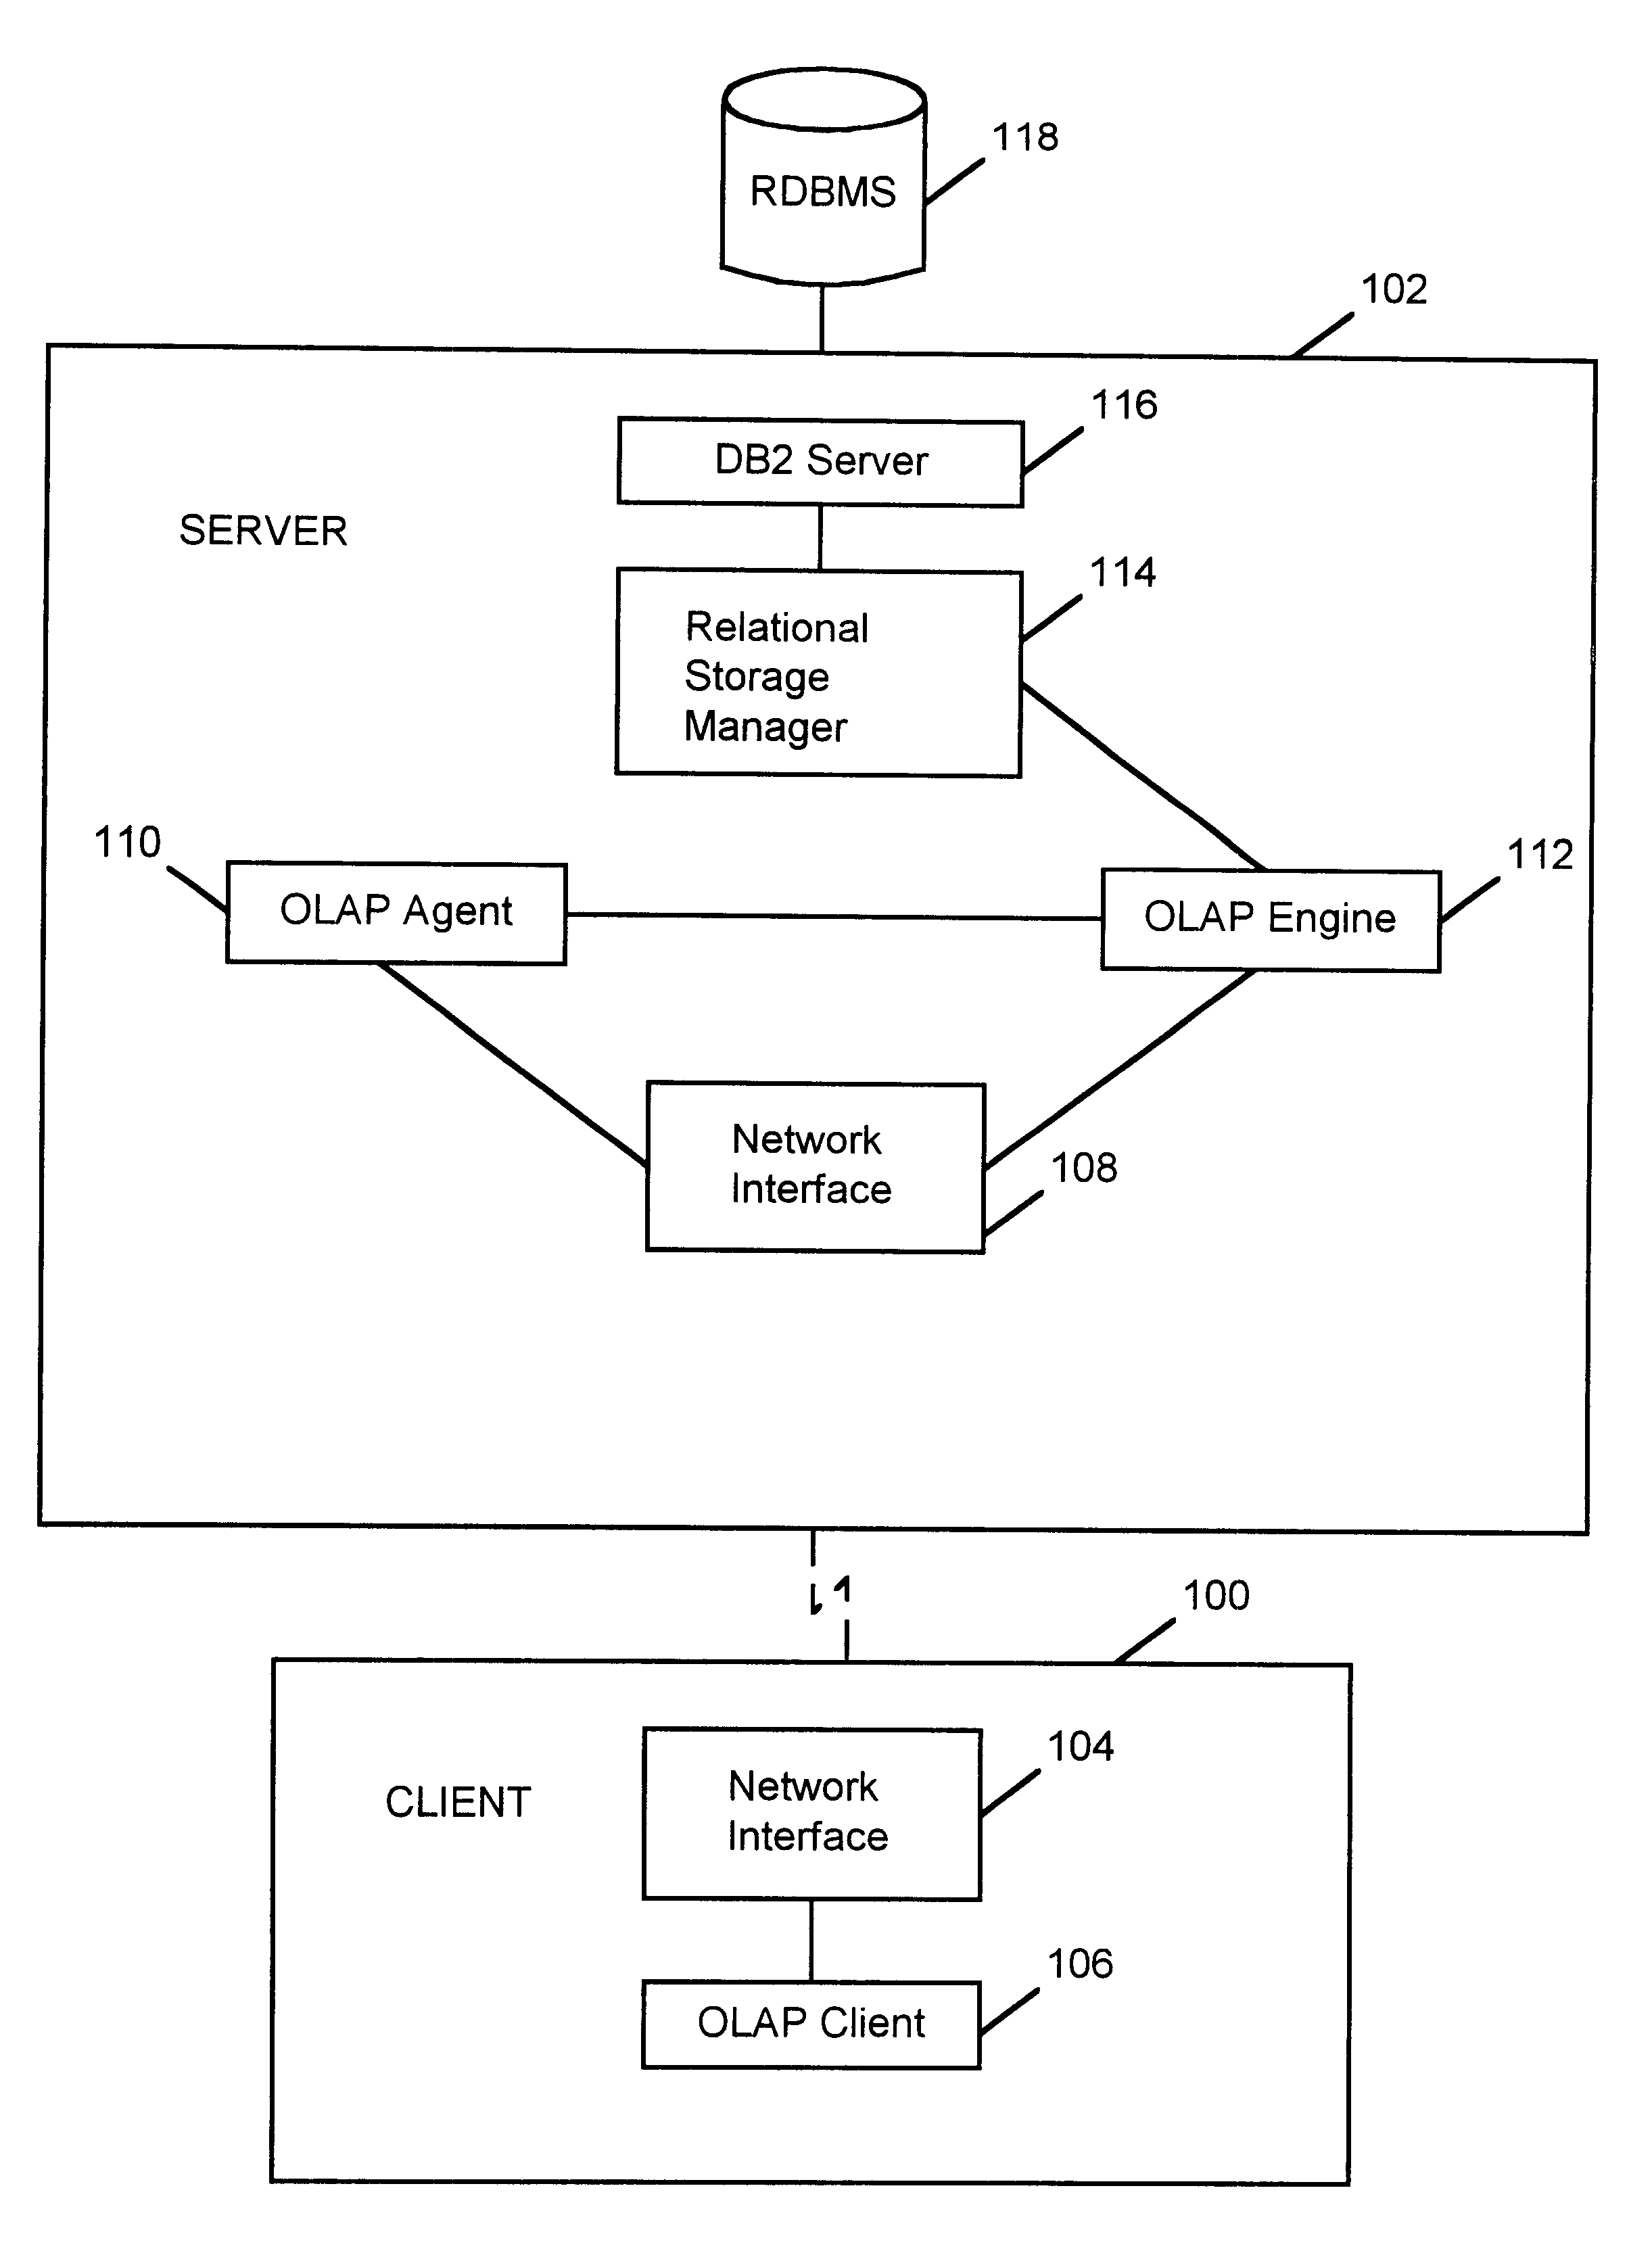 Multi-dimensional restructure performance when adding or removing dimensions and dimensions members